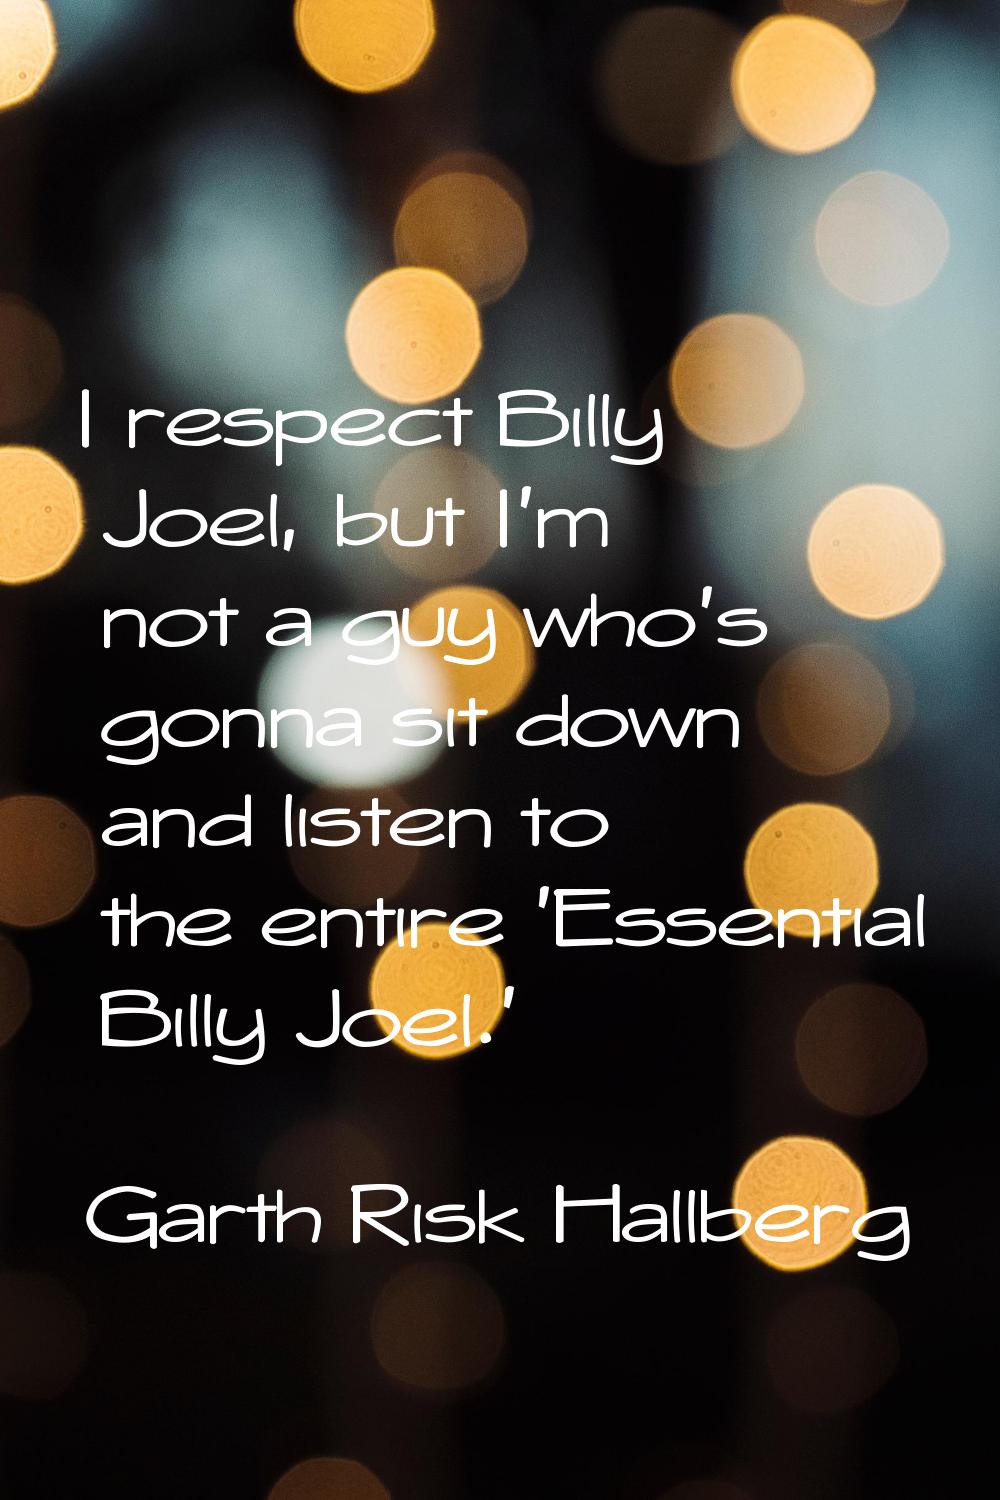 I respect Billy Joel, but I'm not a guy who's gonna sit down and listen to the entire 'Essential Bi